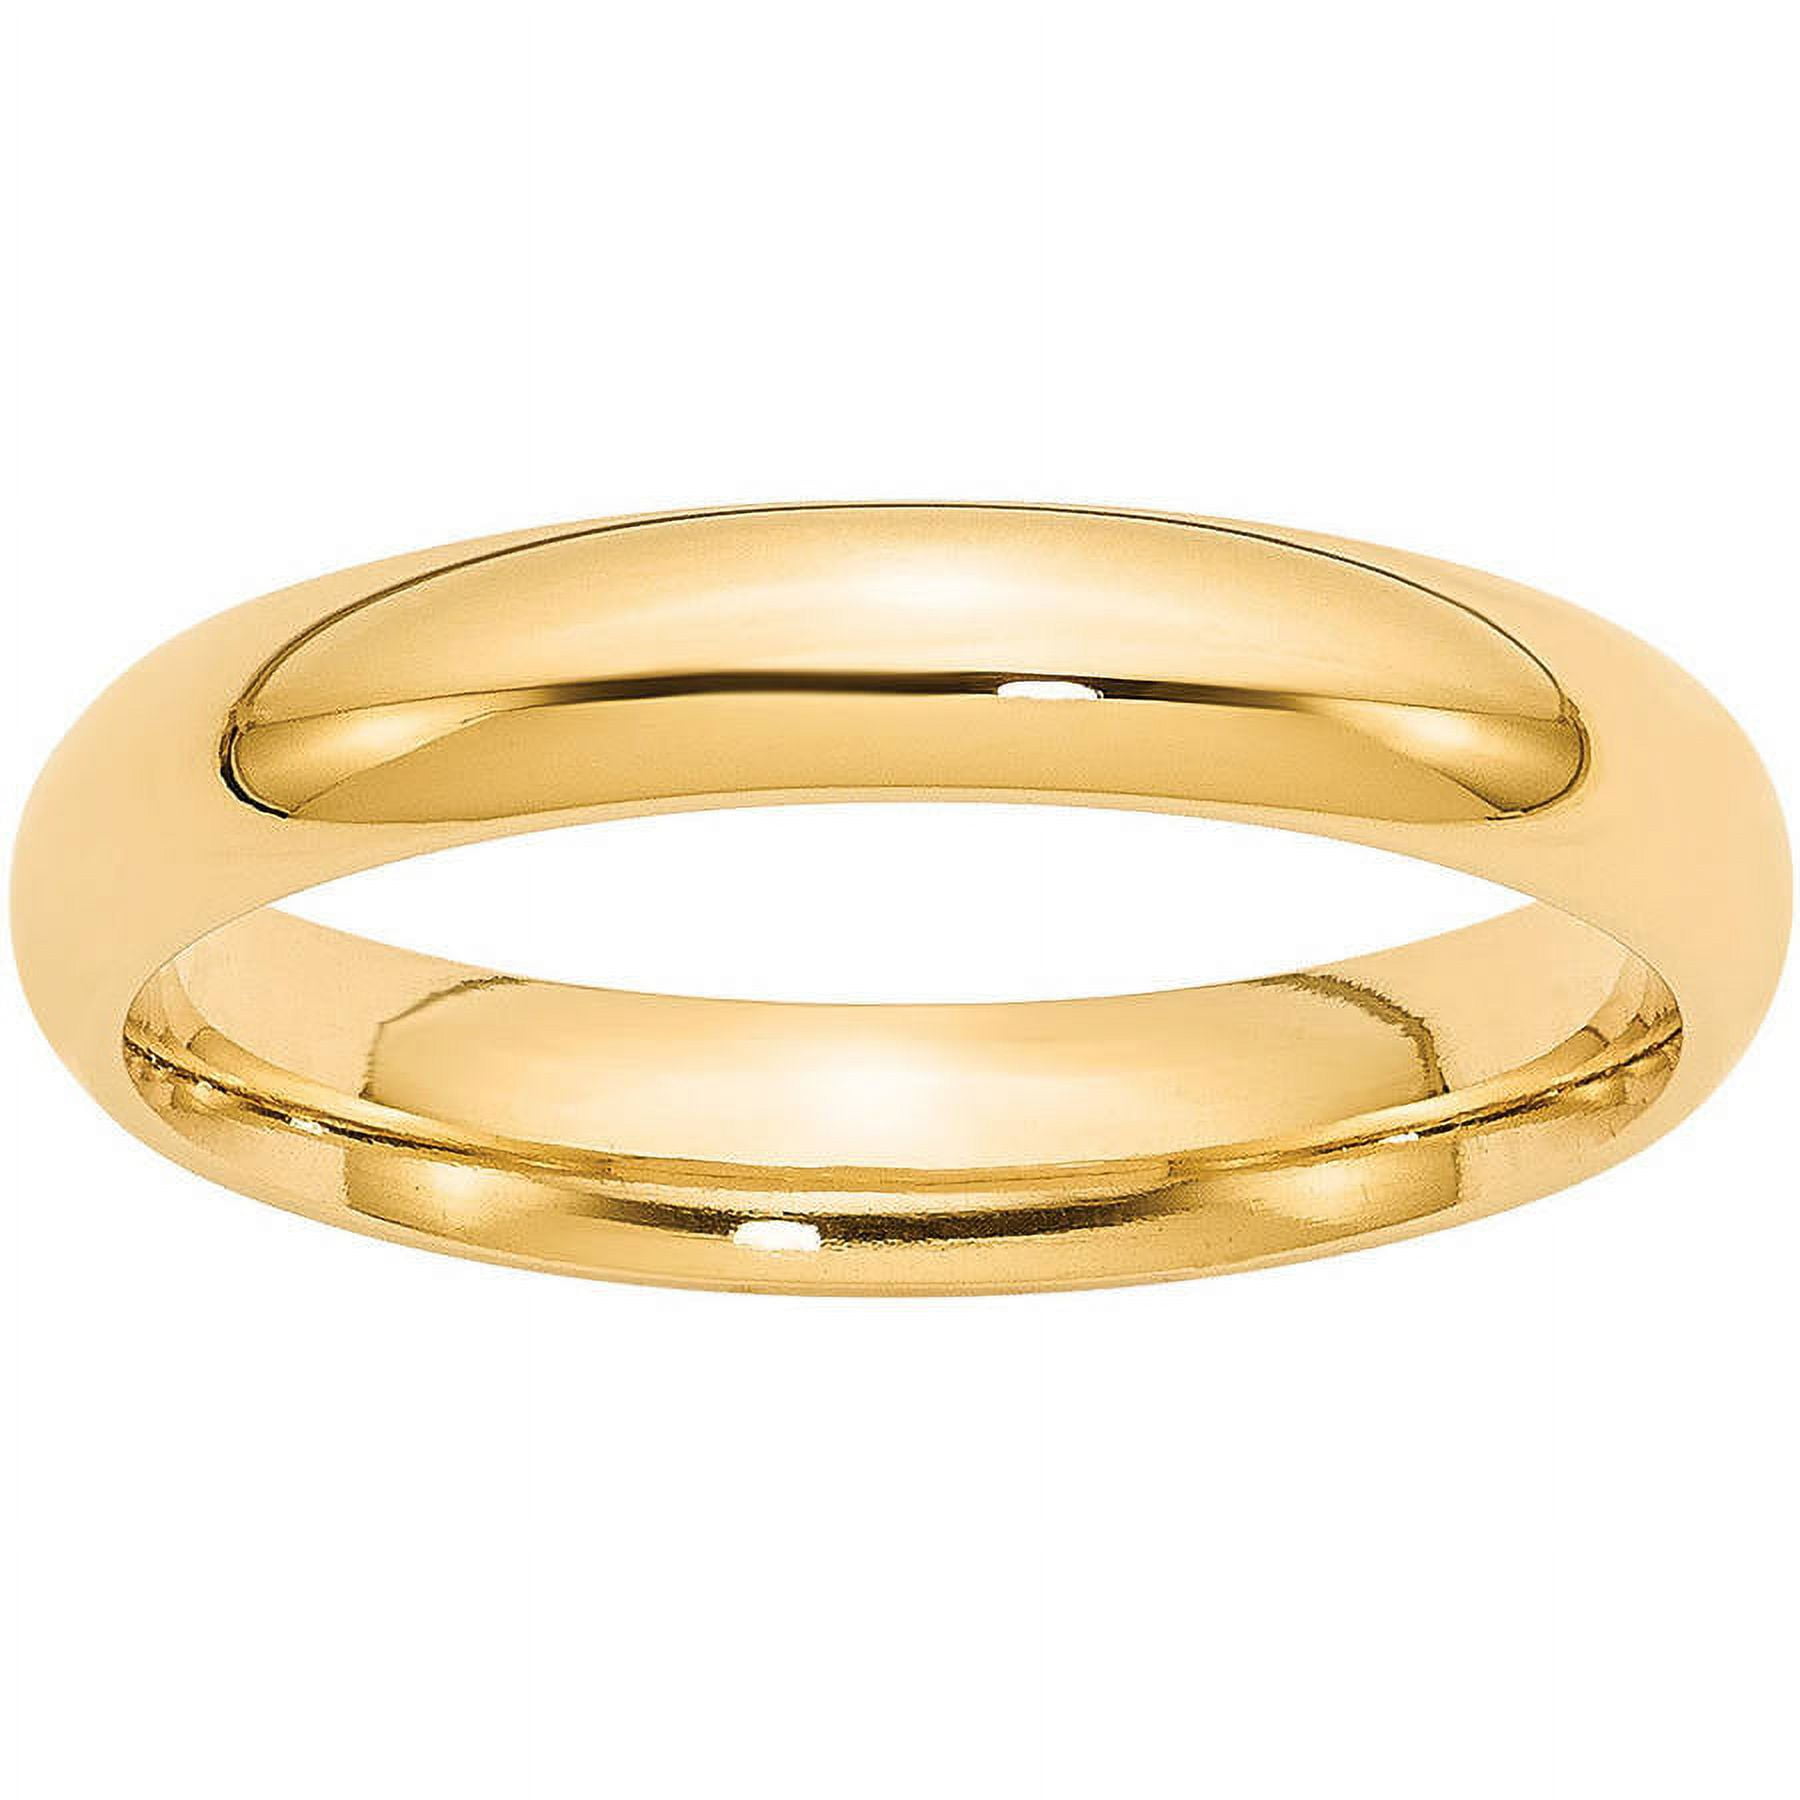 Finest Gold 4 mm 10KY Standard Comfort Fit Ring, Yellow - Size 14